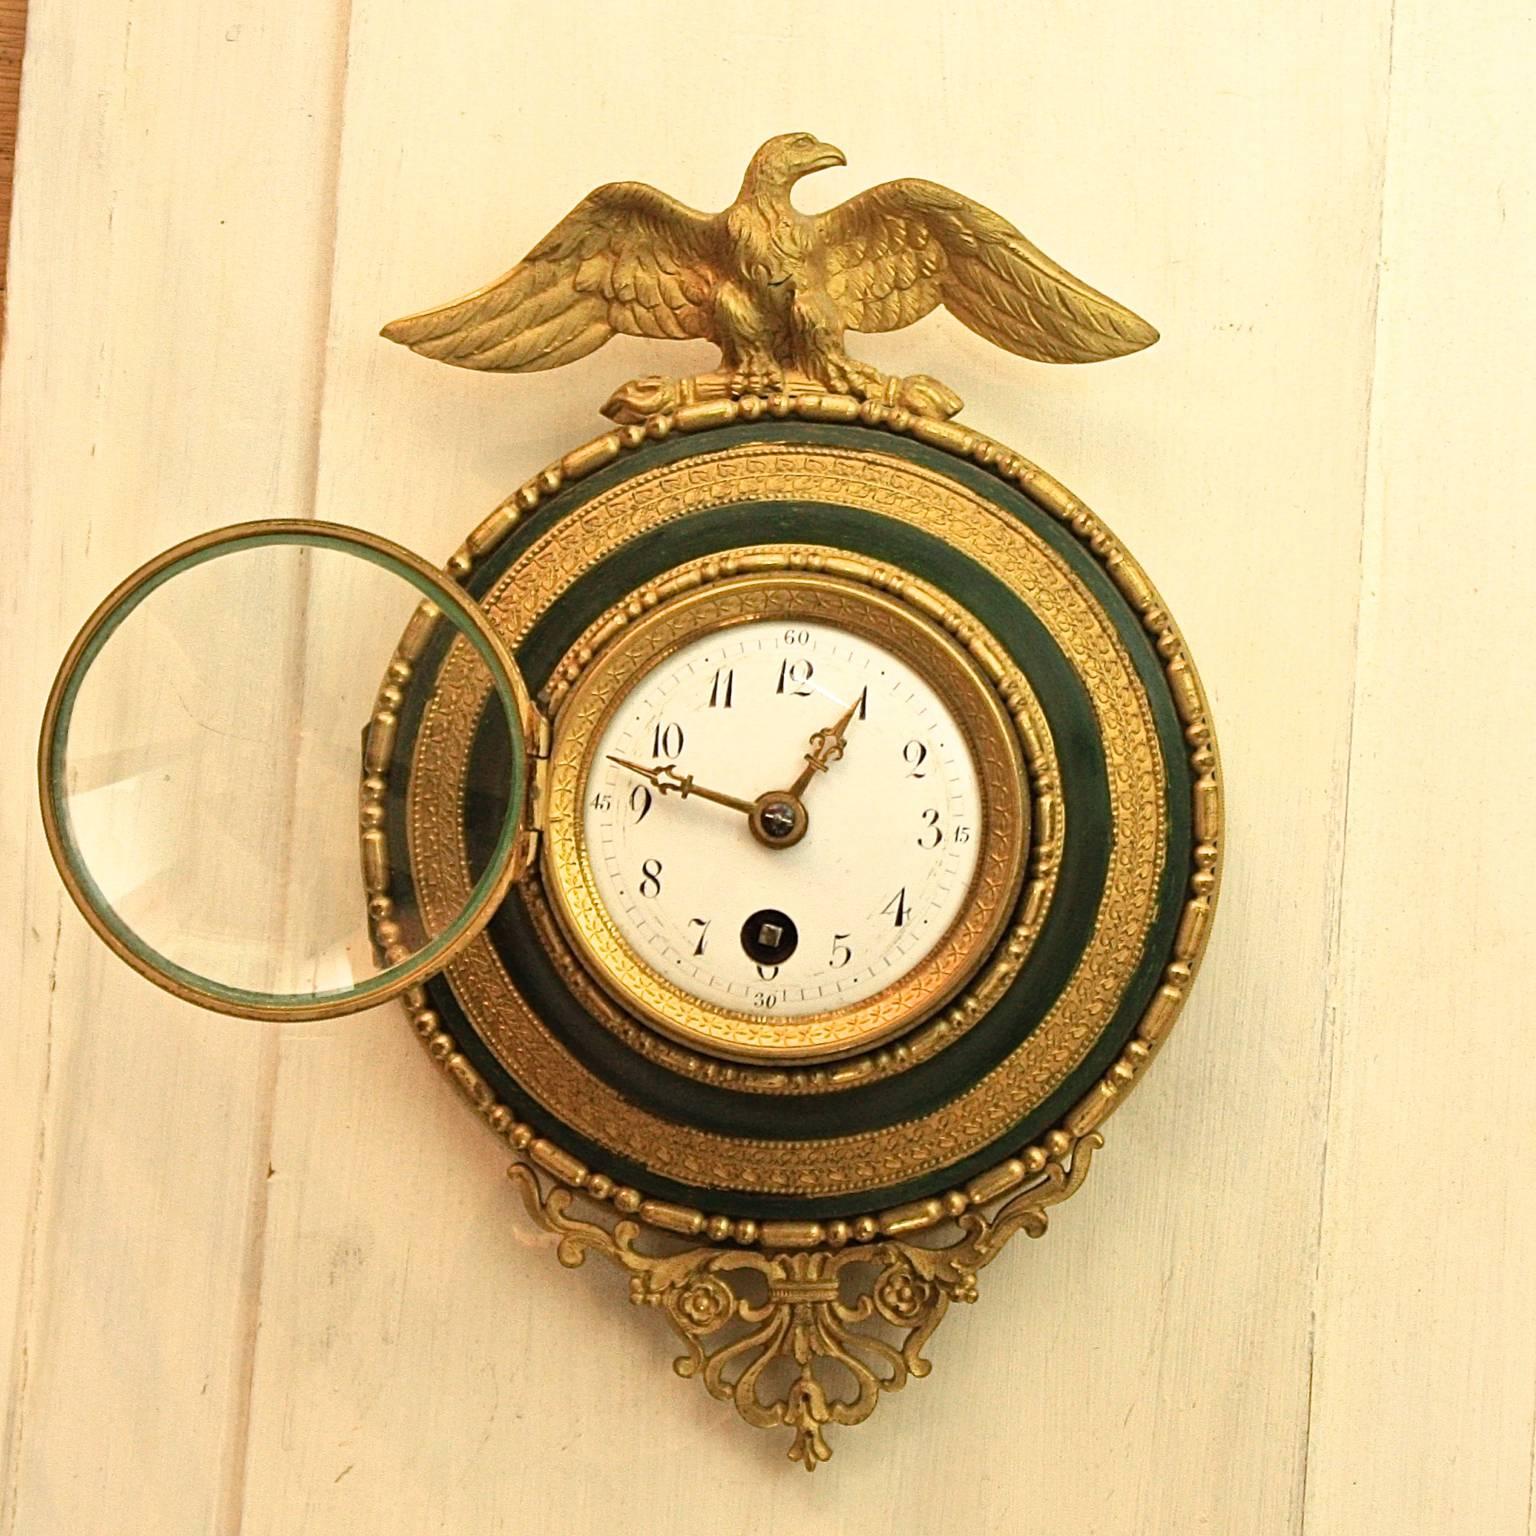 A small 19th century alcove wall clock, a 'pendules d'alcove' that was usually hanging in an alcove above a bed. The repeating mechanisms that chimed the nearest hour and quarter hour when a string was pulled eliminated the need to light a candle to